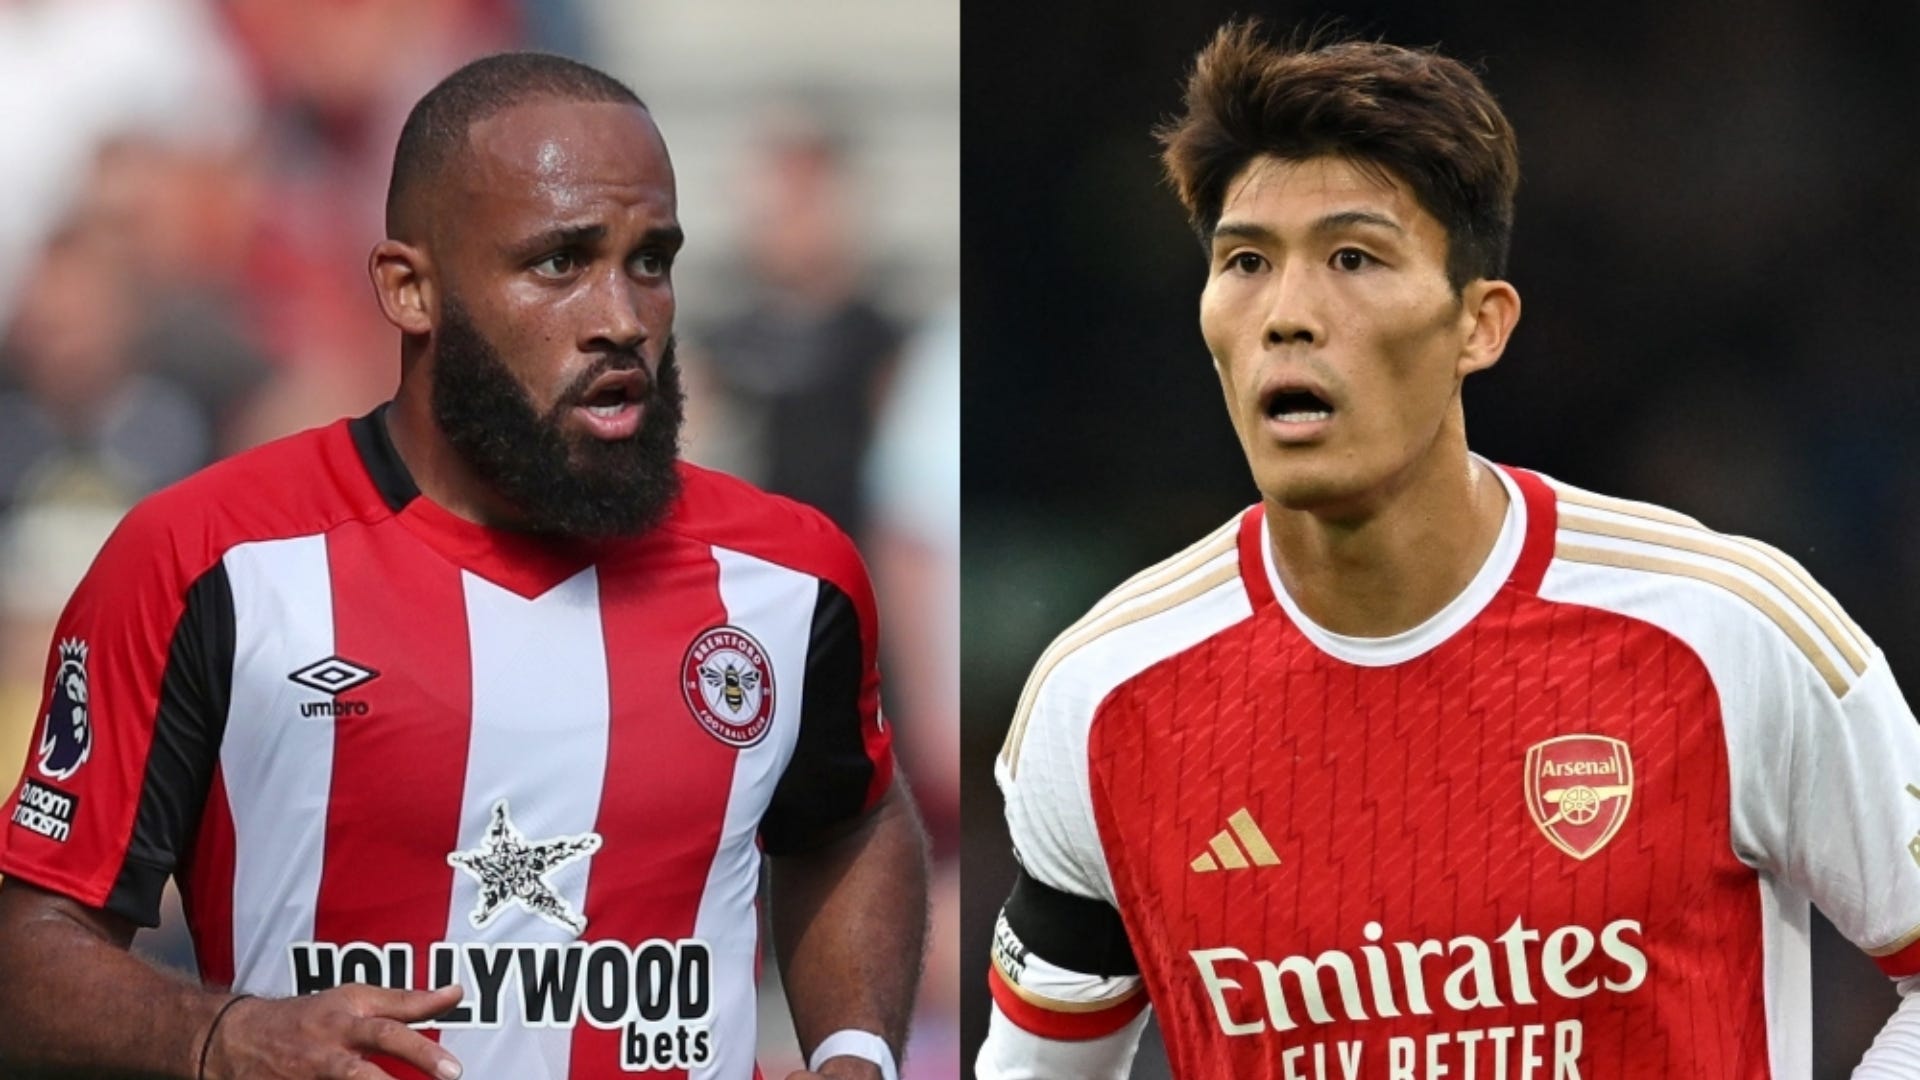 Brentford vs Arsenal Live stream, TV channel, kick-off time and where to watch Goal US